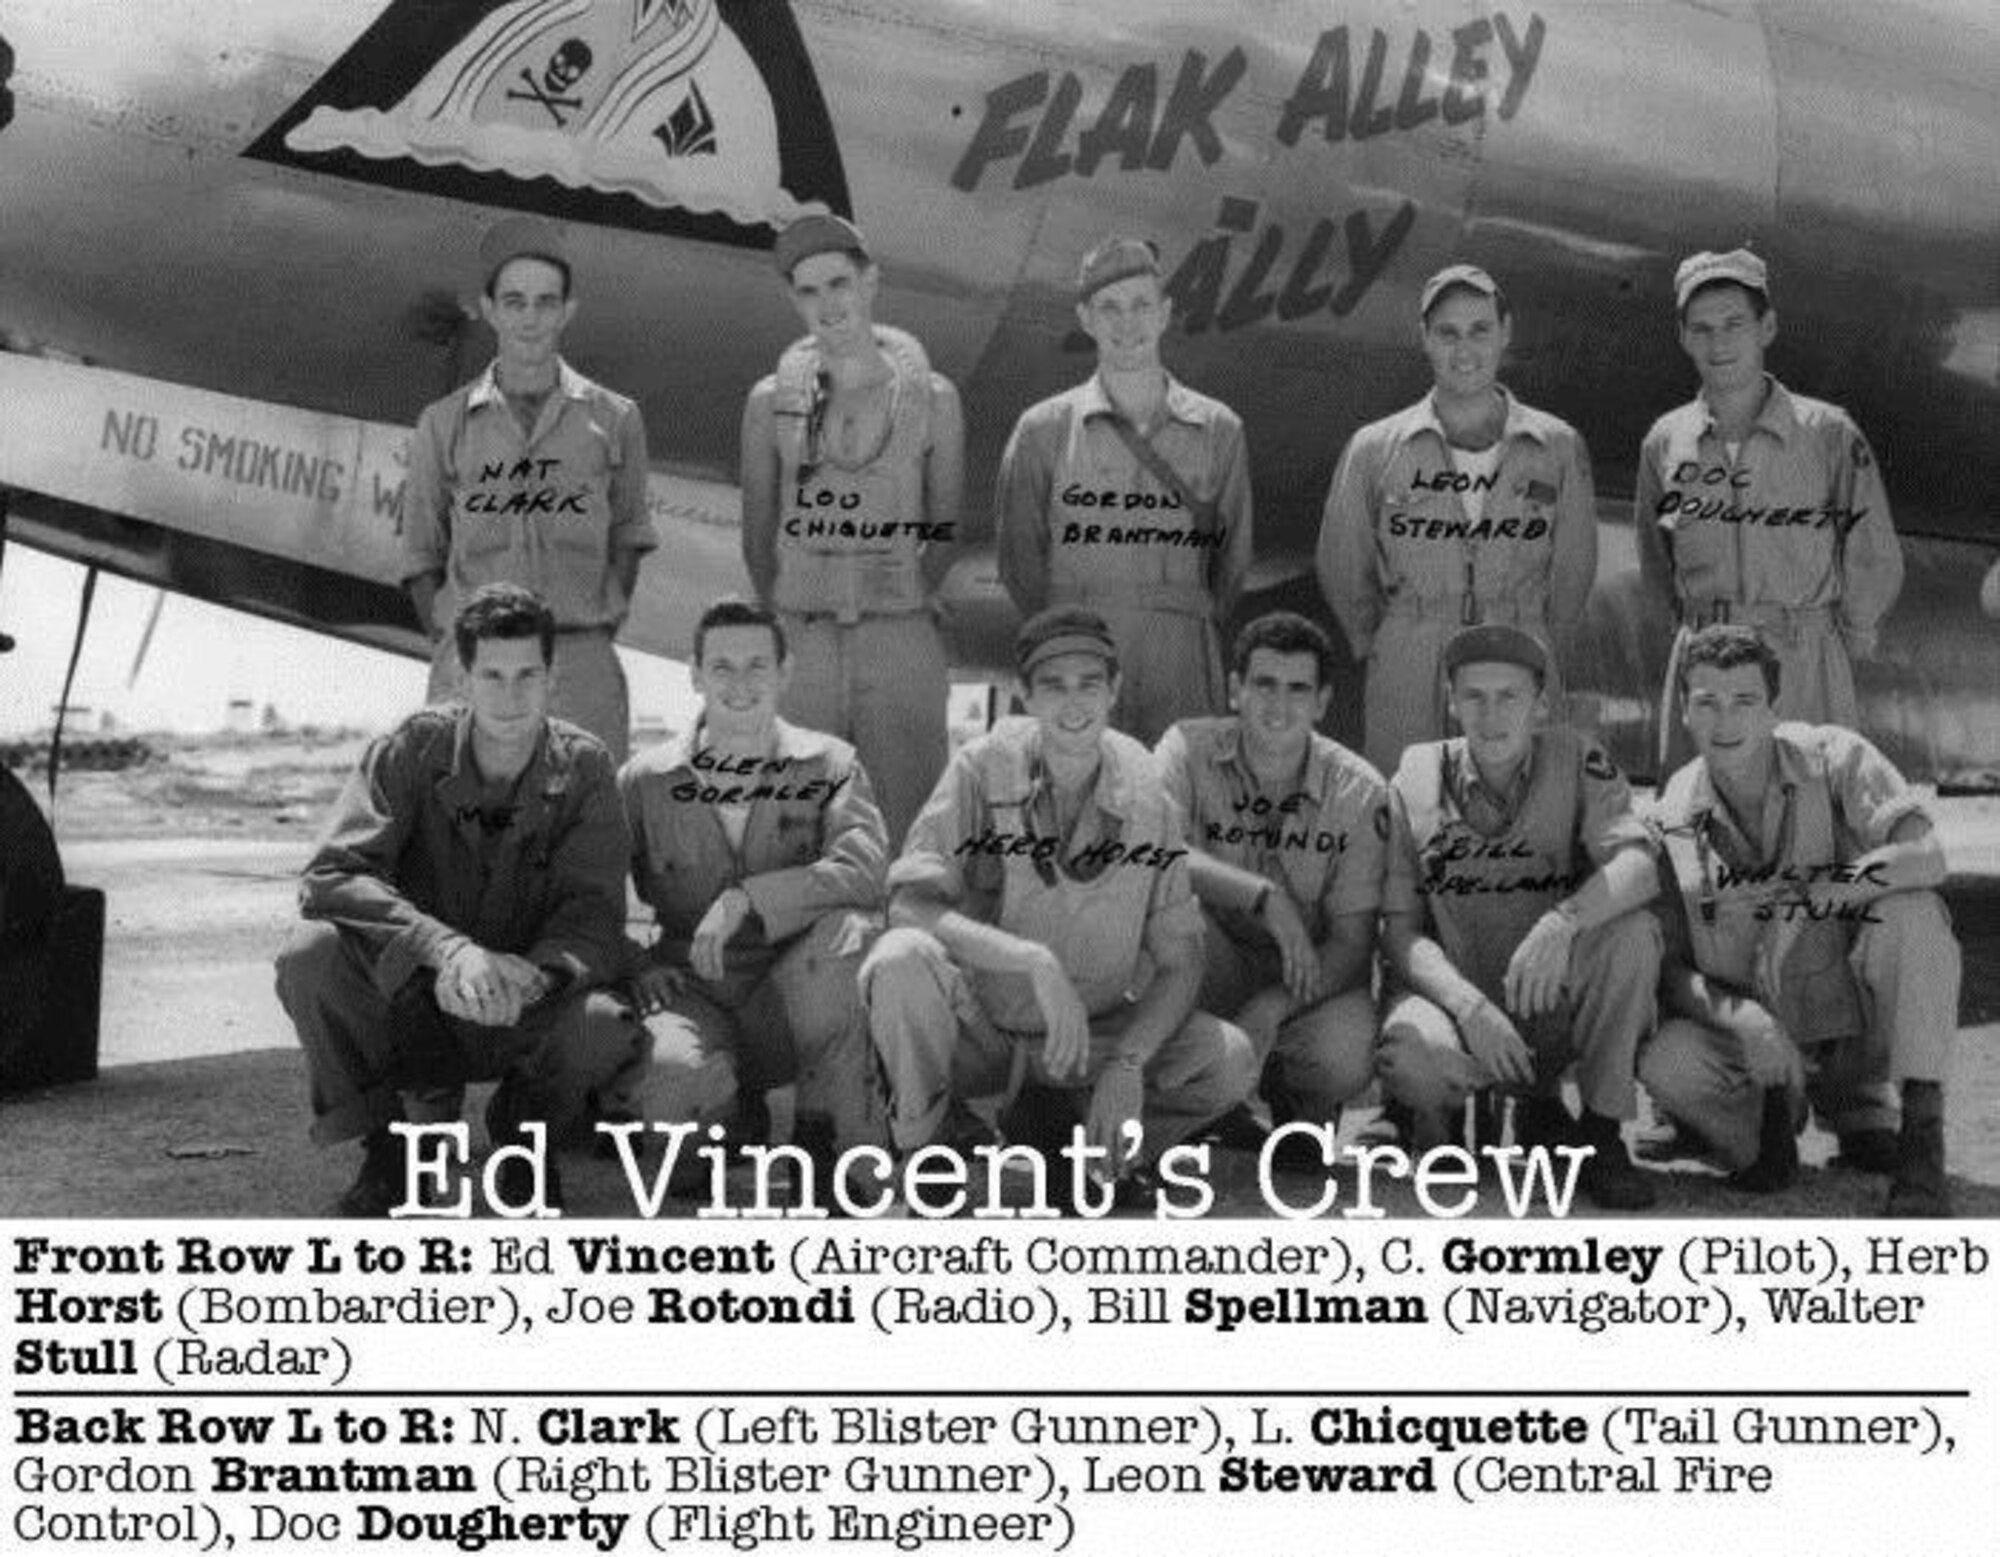 Aircraft Commander Ed Vincent completed 32 combat missions in charge of Crew 4012 assigned to the 40th Bomb Squadron.  The crew flew the Superfortress “Flak Alley Sally,” a B-29-55-BW, serial number 42-24878.  In the front row, left to right are  1st Lt. Edgar L. Vincent (Aircraft Commander), 2nd Lt. Glenn Gormley (Pilot), 1st Lt. Herbert G. Horst (Bombardier), S/Sgt Joseph N. Rotondi (Radio Operator), 1st Lt. William G. Spellman (Navigator) and S/Sgt Walter H. Stull (Radar Operator) man Standing in the back row, left to right are S/Sgt Nathaniel B, Clark (Left Gunner), Sgt. Louis L.  Chiquette (Tail Gunner), S/Sgt Gordon P. Brantman (Right Gunner), T/Sgt Leon Steward (Central Fire Control Gunner) and M/Sgt Charles W. Dougherty (Flight Engineer).  (Courtesy 6th Bomb Group Association)